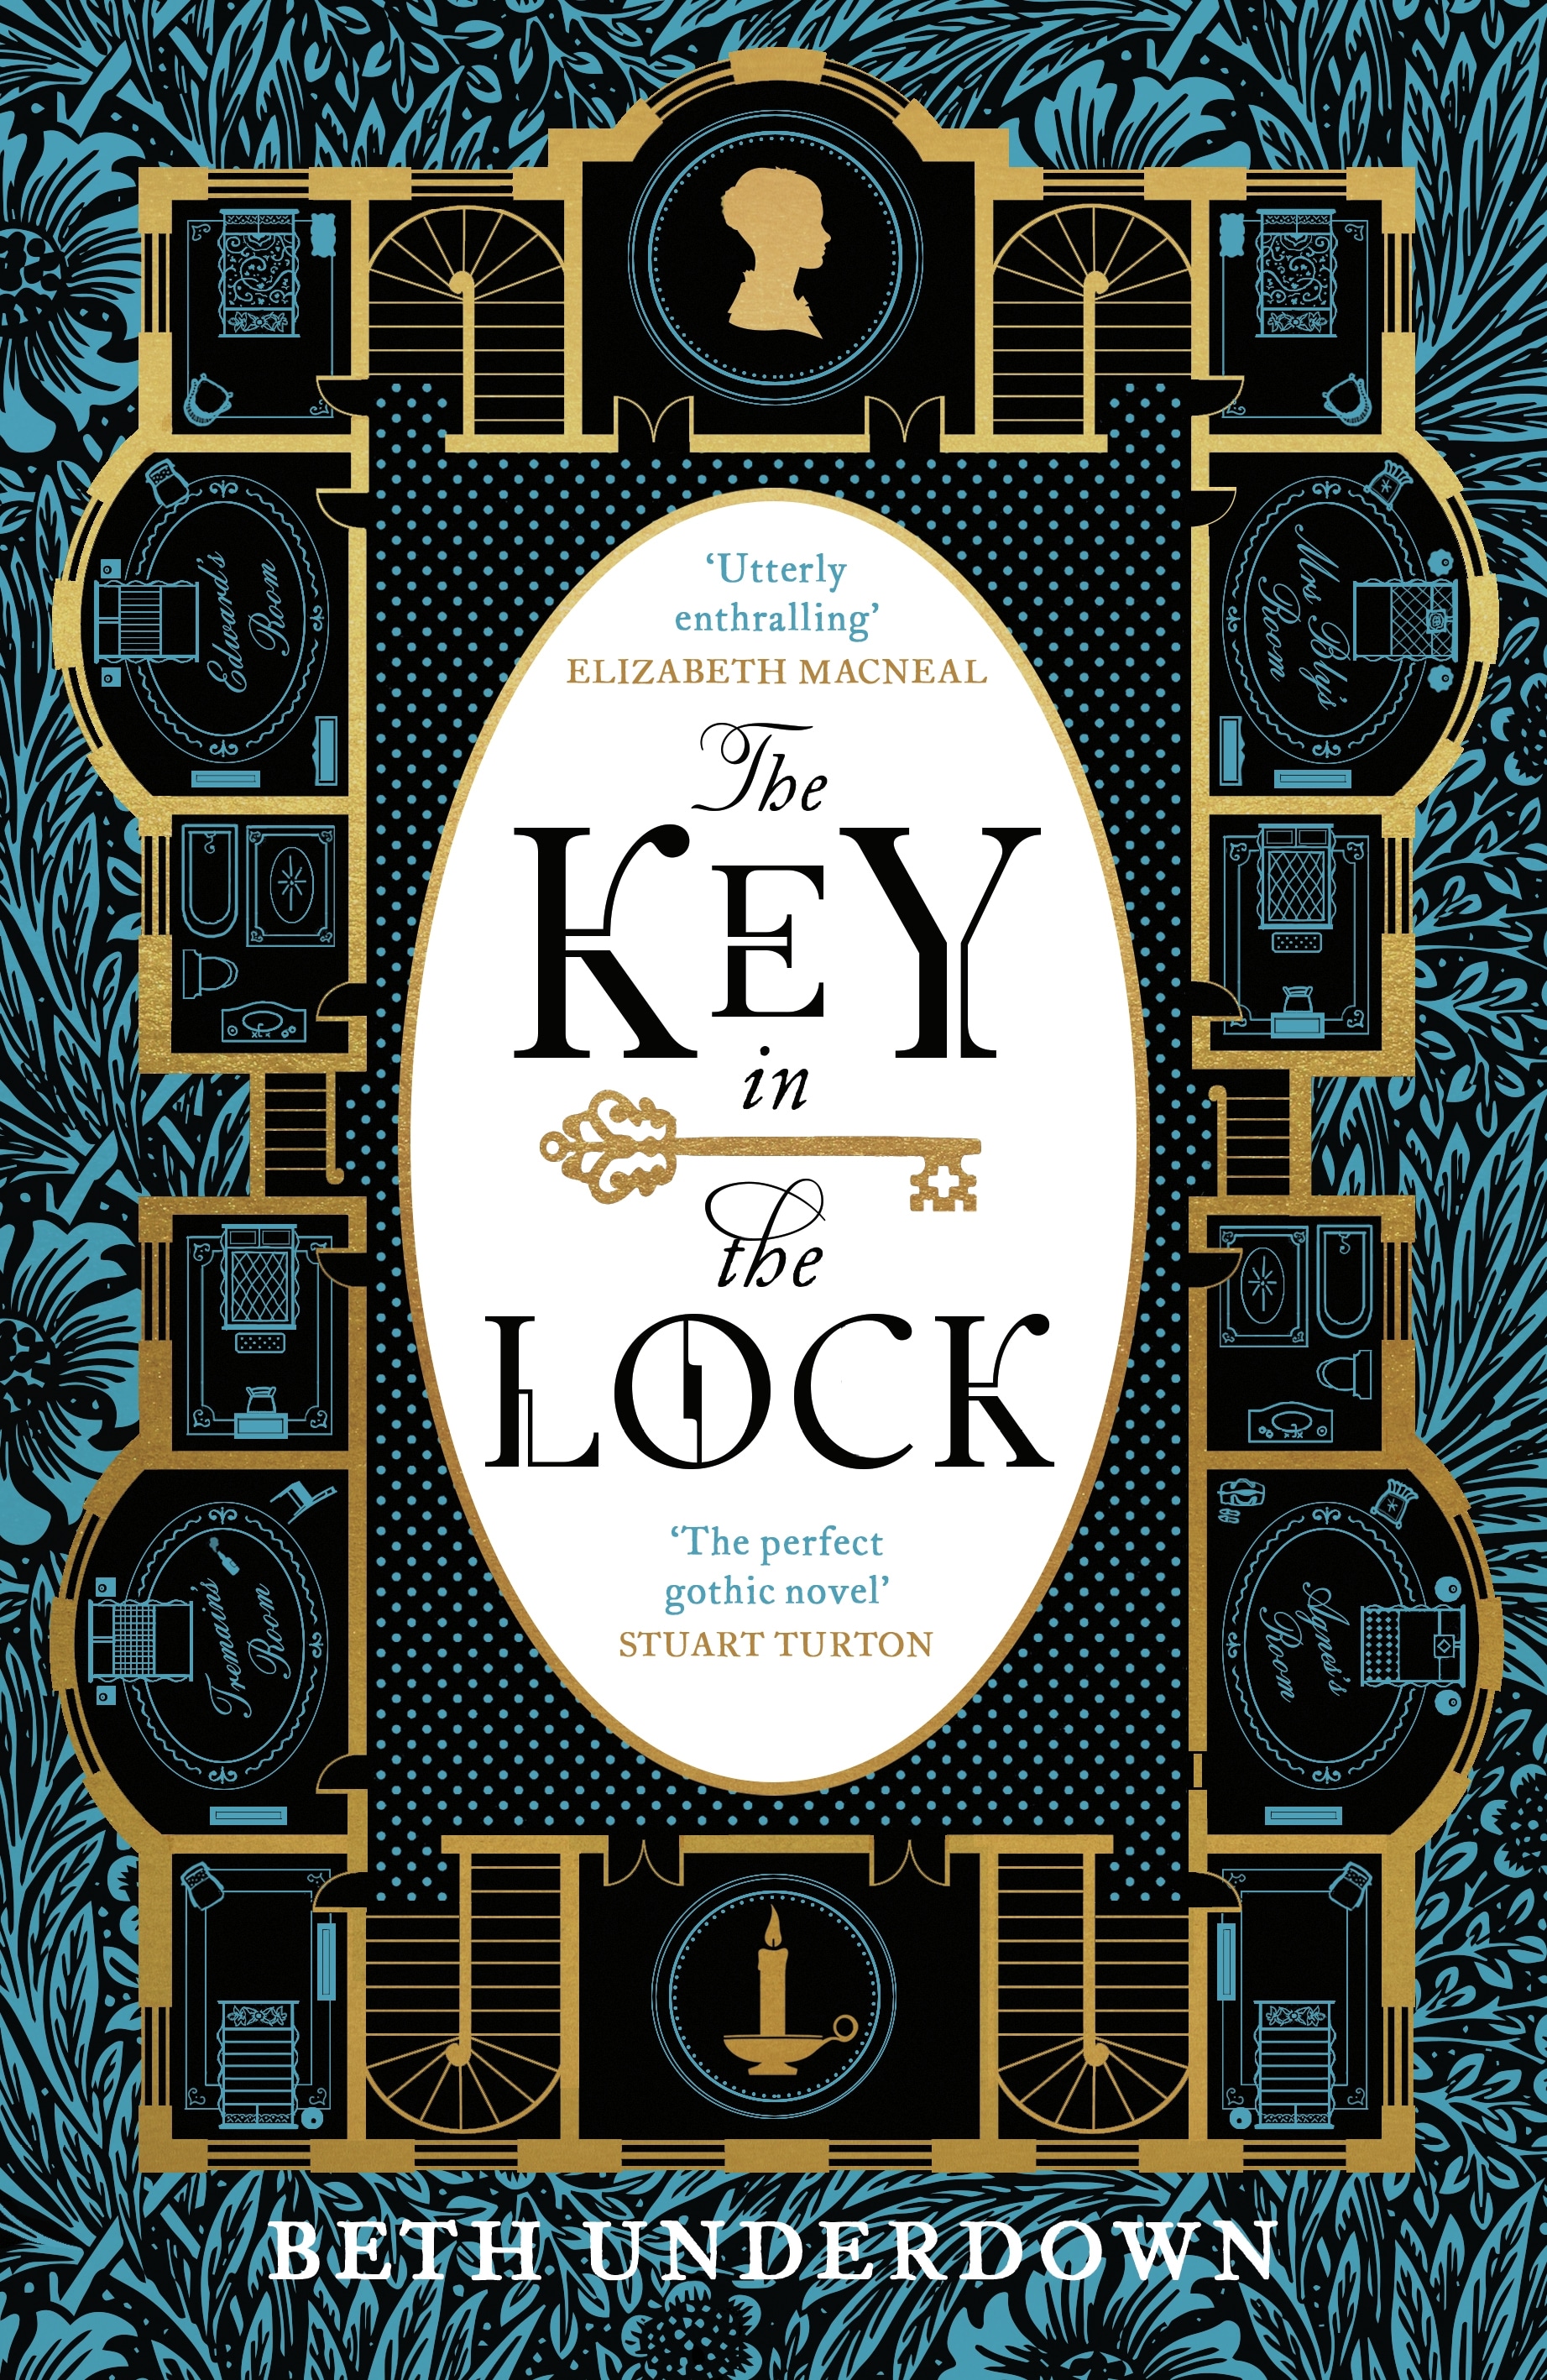 Book “The Key In The Lock” by Beth Underdown — January 27, 2022